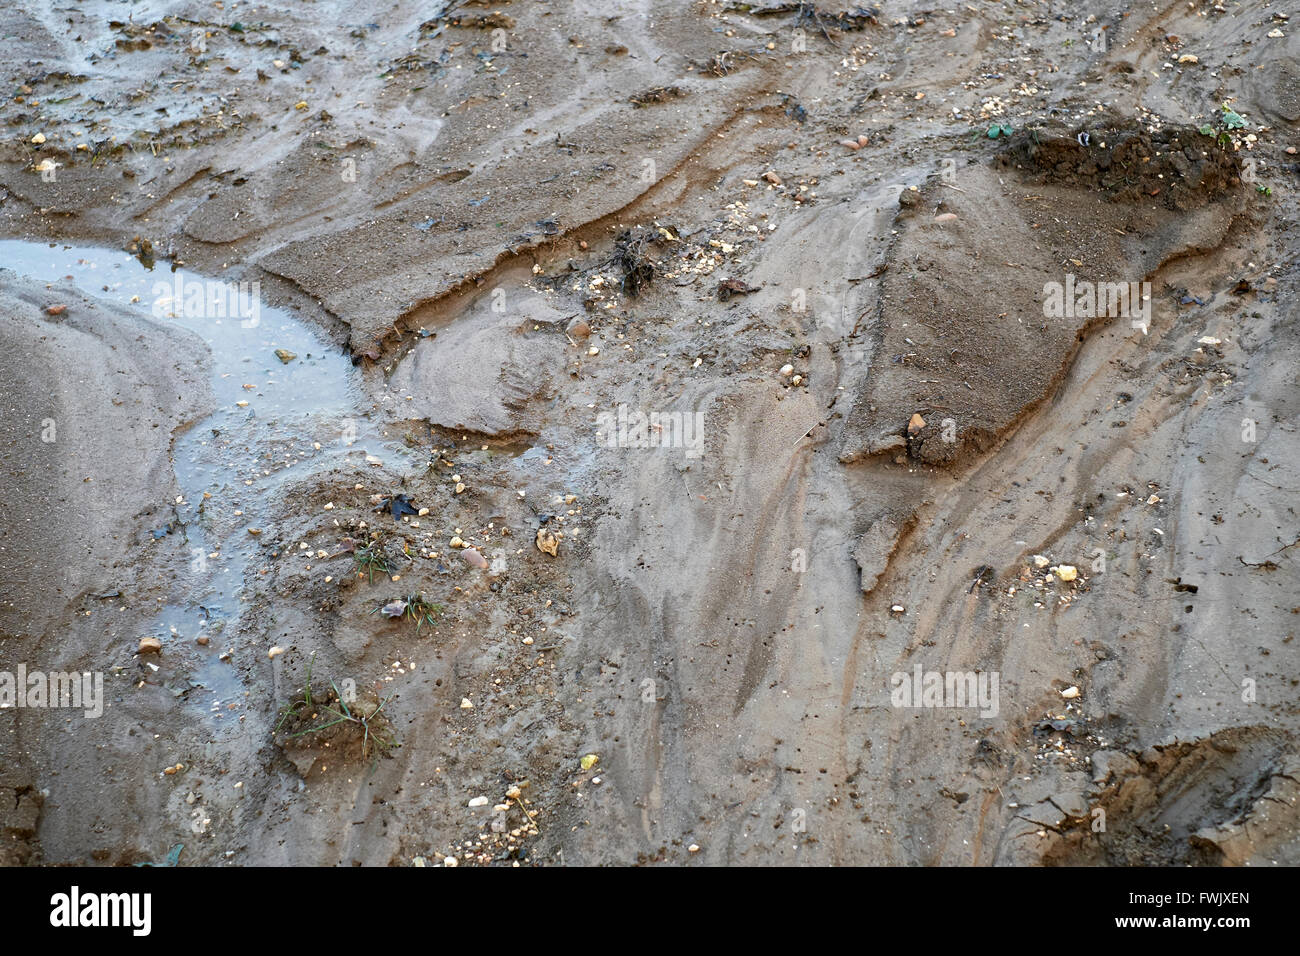 Soil erosion as a result of overland flood water. Stock Photo